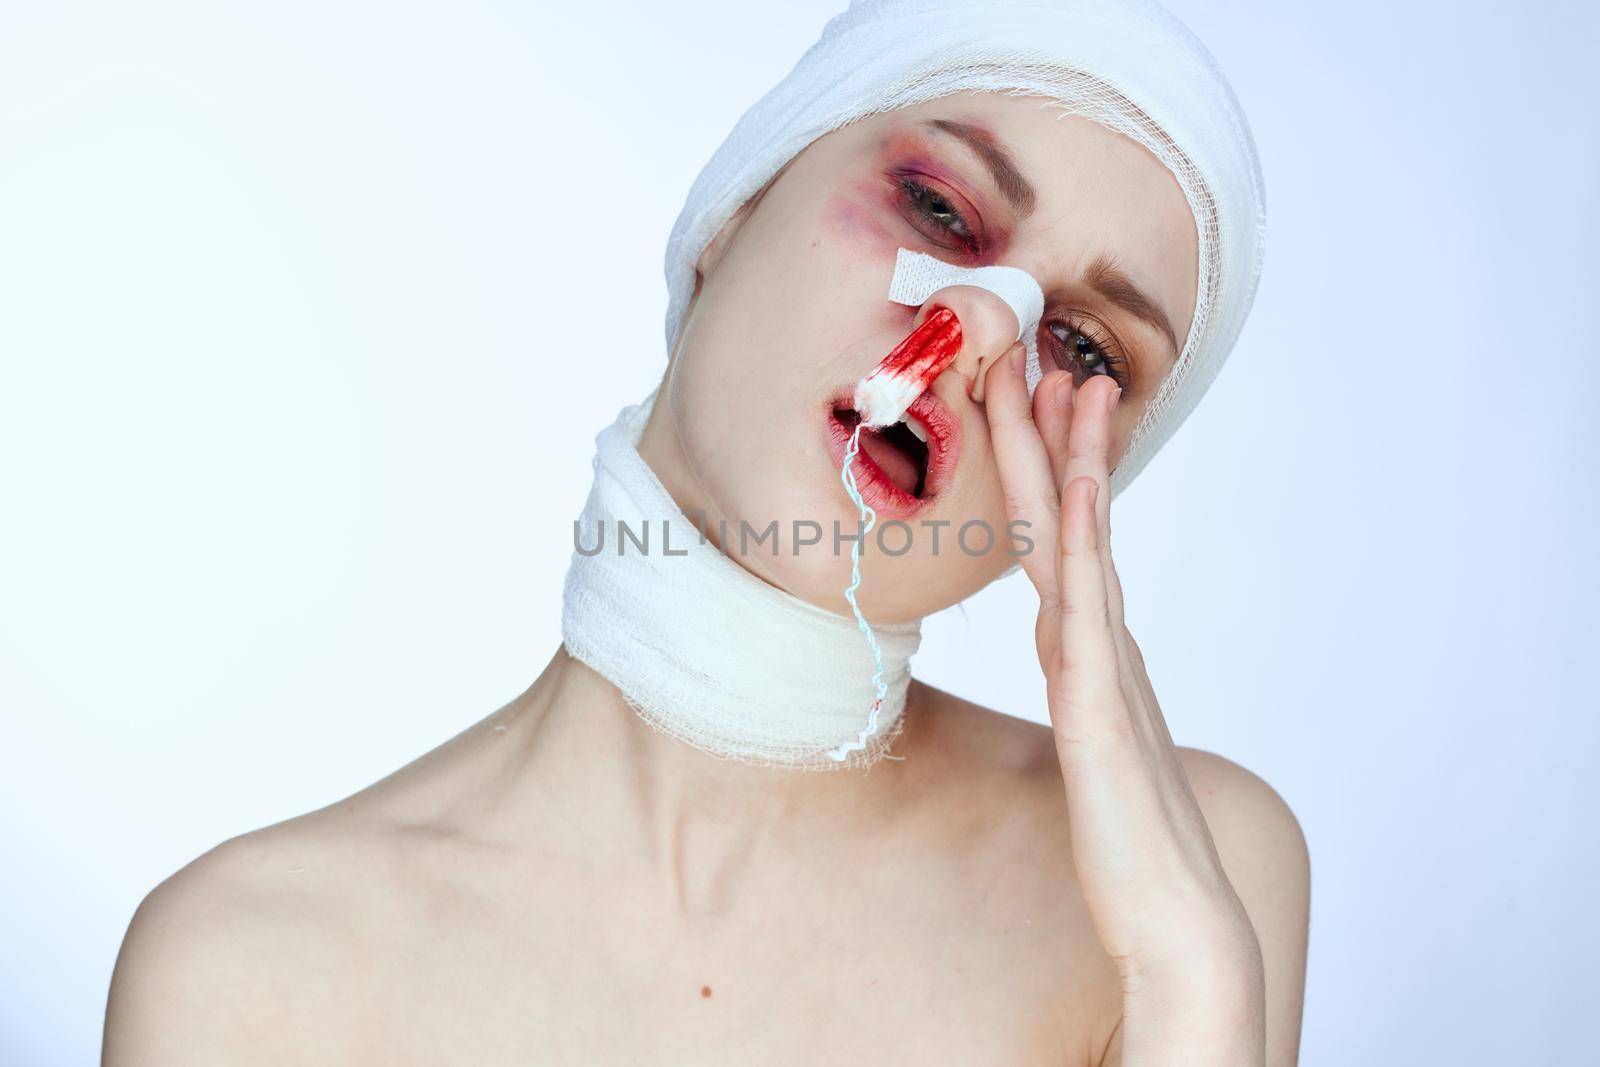 woman bruised face medicine treatment injury accident light background. High quality photo